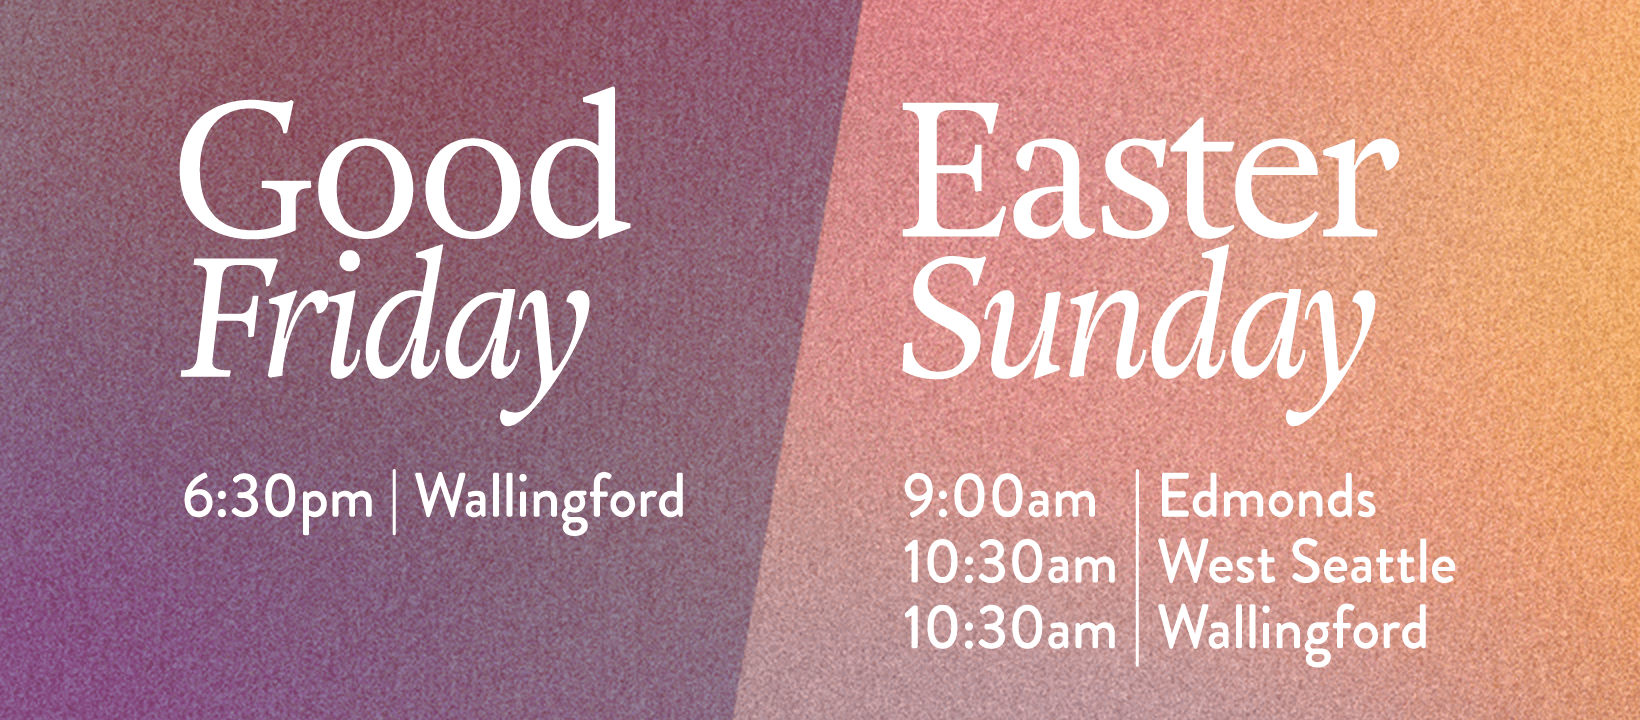 Seattle, West Seattle and Edmonds join us for Good Friday worship and Easter Sunday worship April 2023!